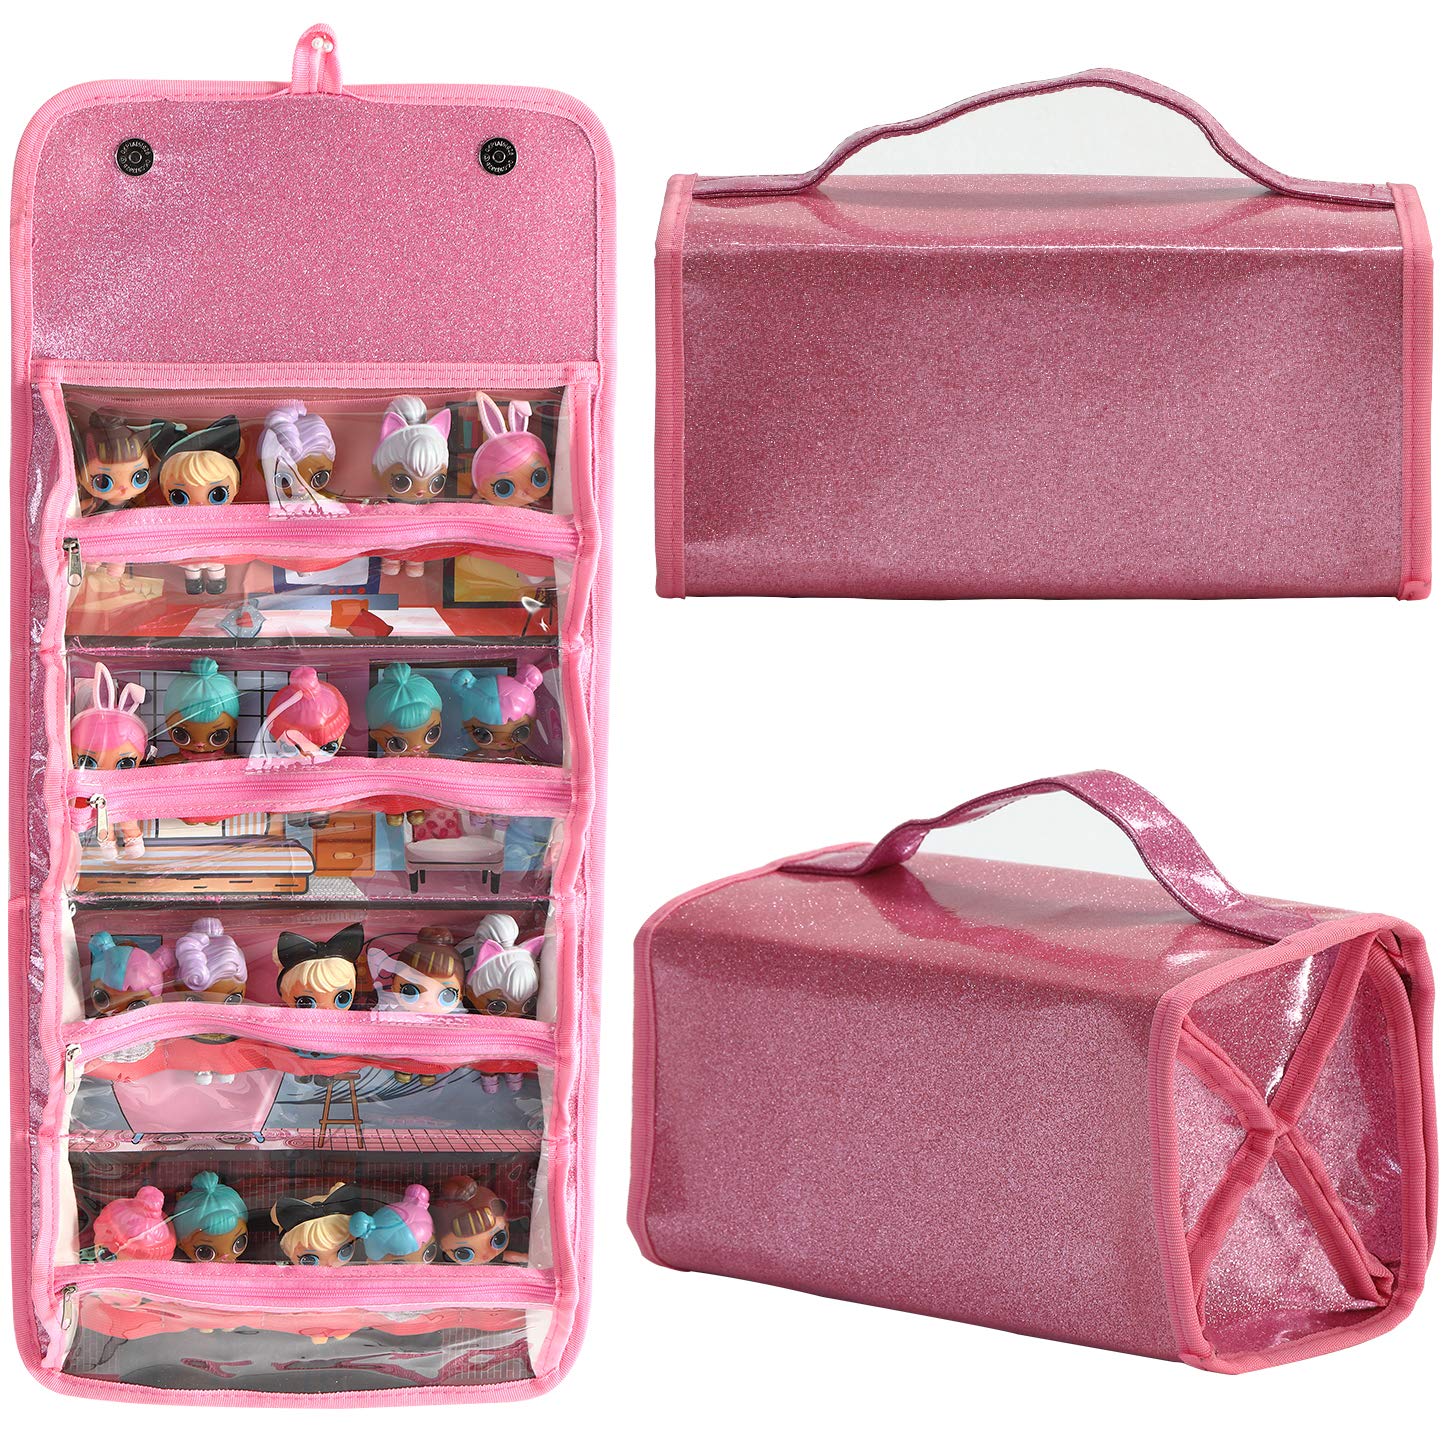 Leeche Storages & Display Case for Dolls Compatible with All LOL Surprise Dolls,Easy Carrying Storage Organizer Clear View Case